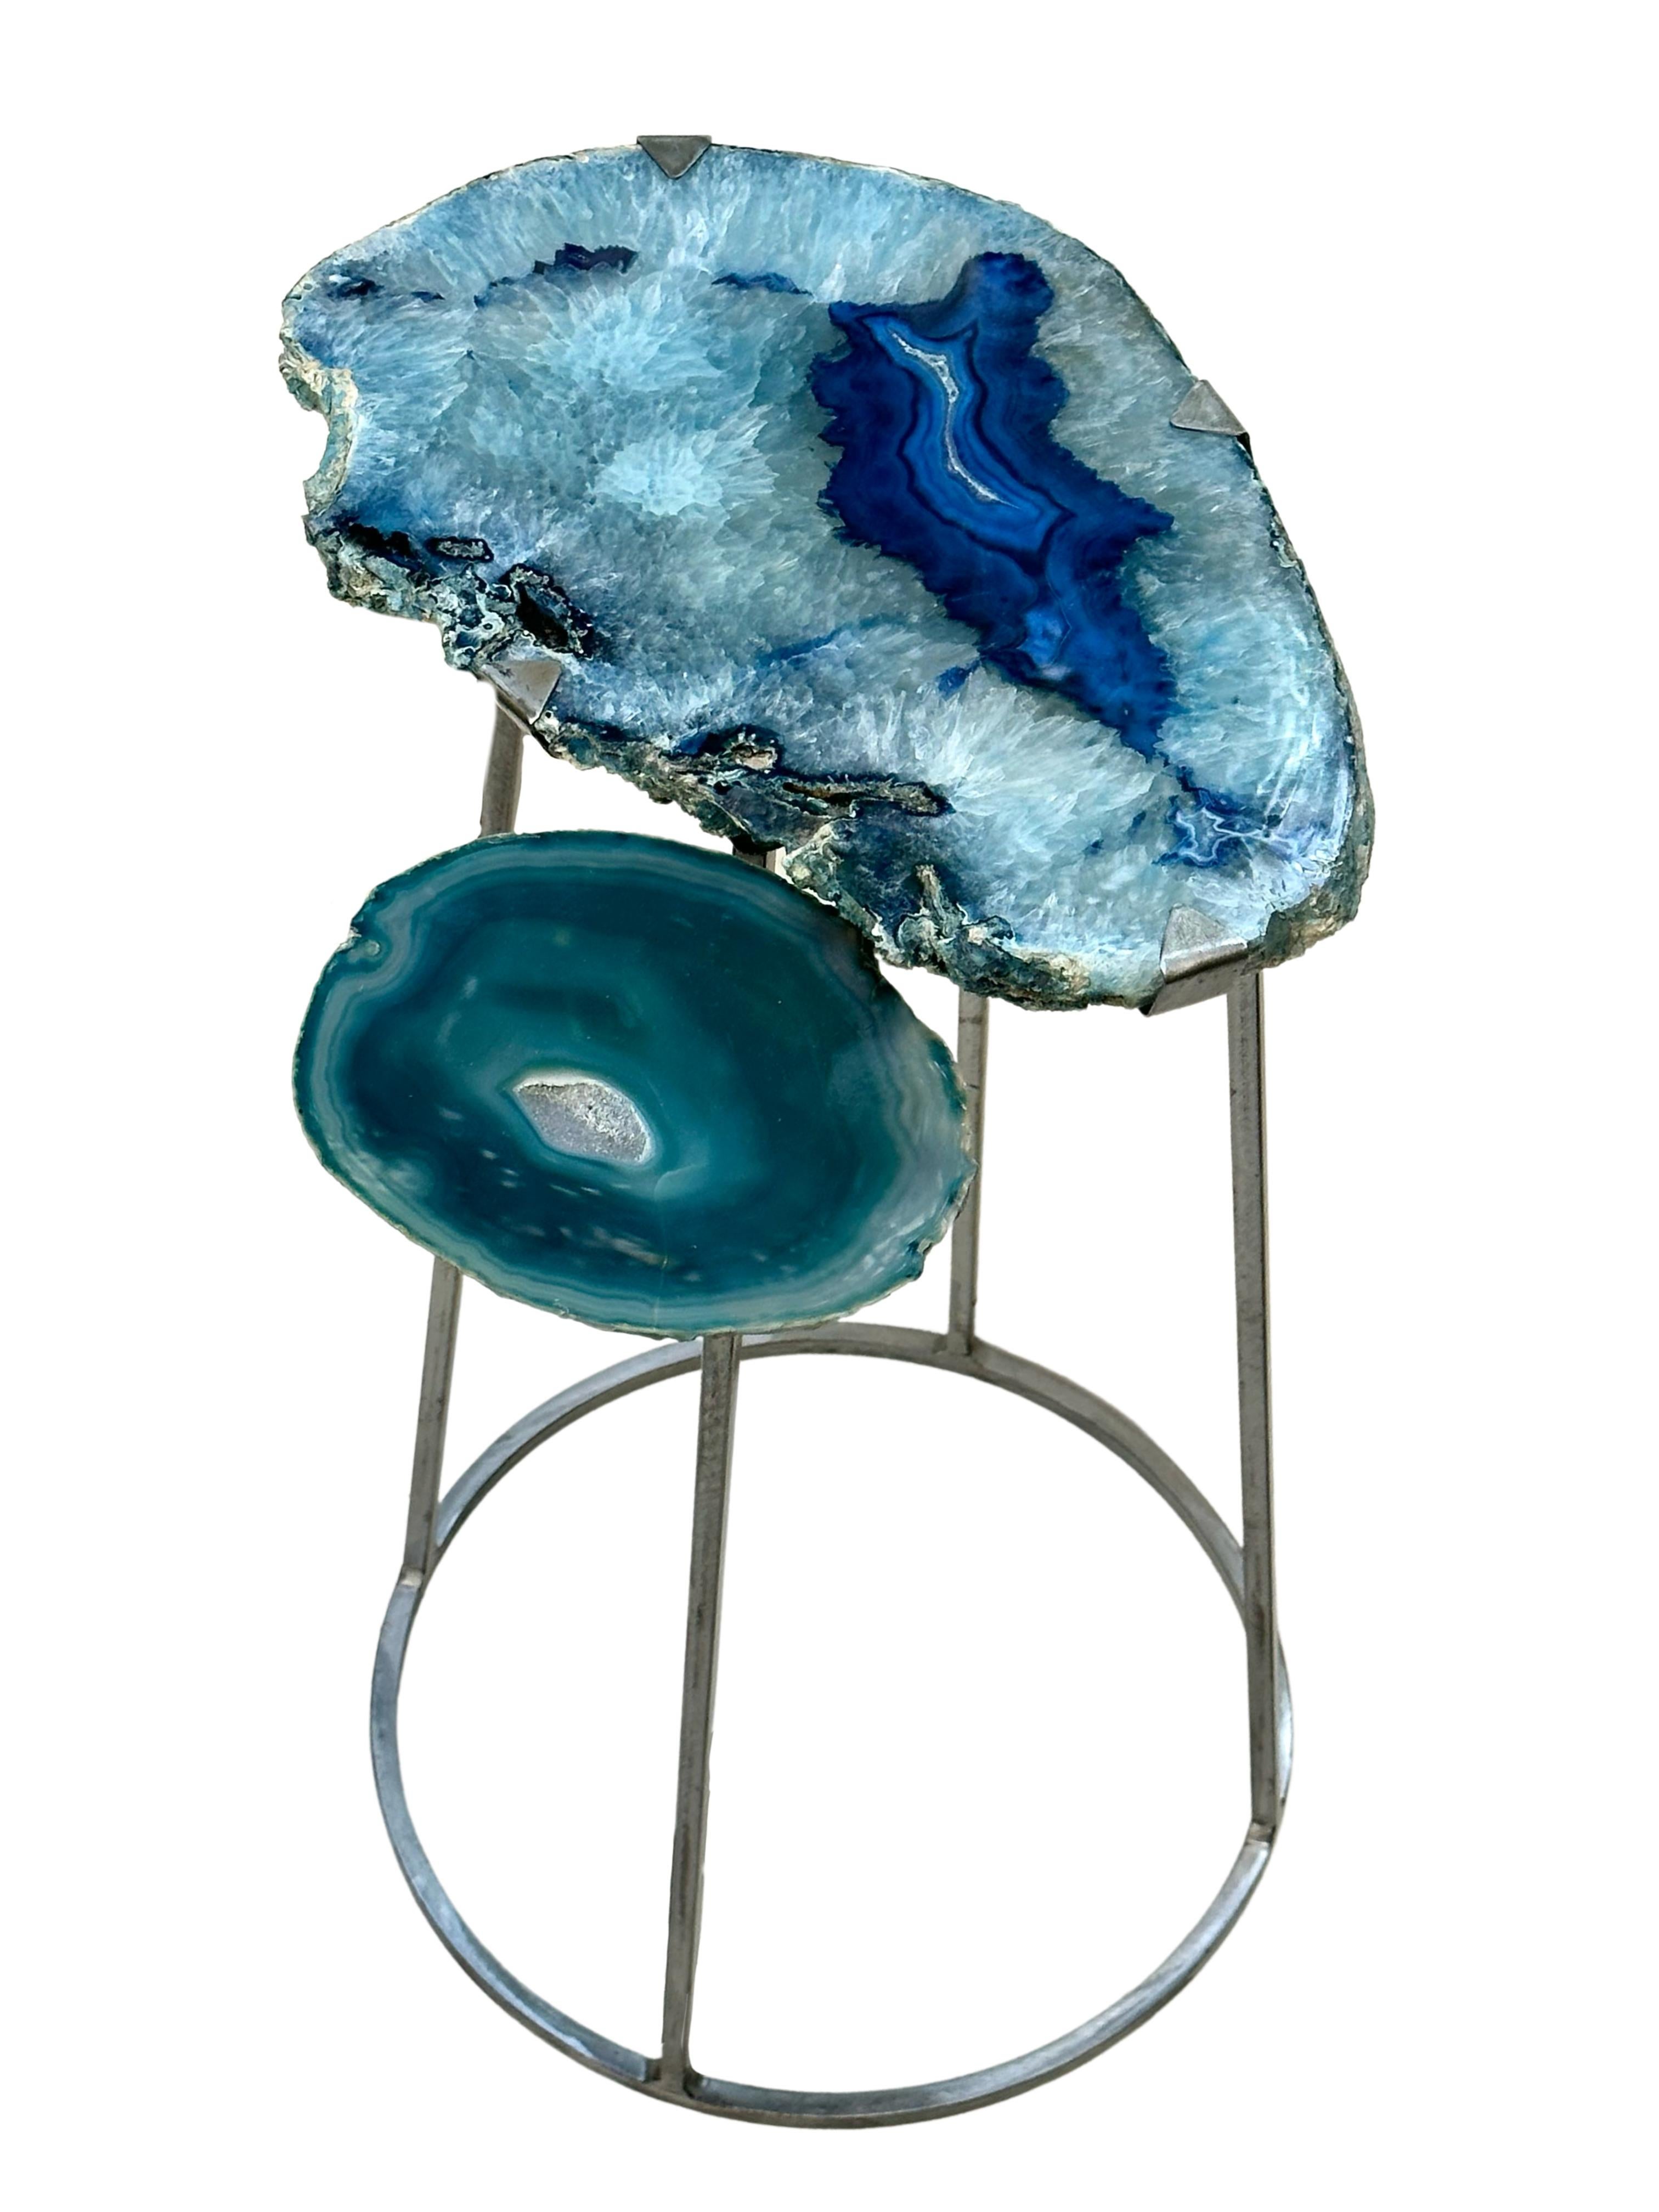 Valdomiro Favoreto Side Table
Iron base and varnish in natural color
Agate tops in shades of blue
Onepiece*
#handmade